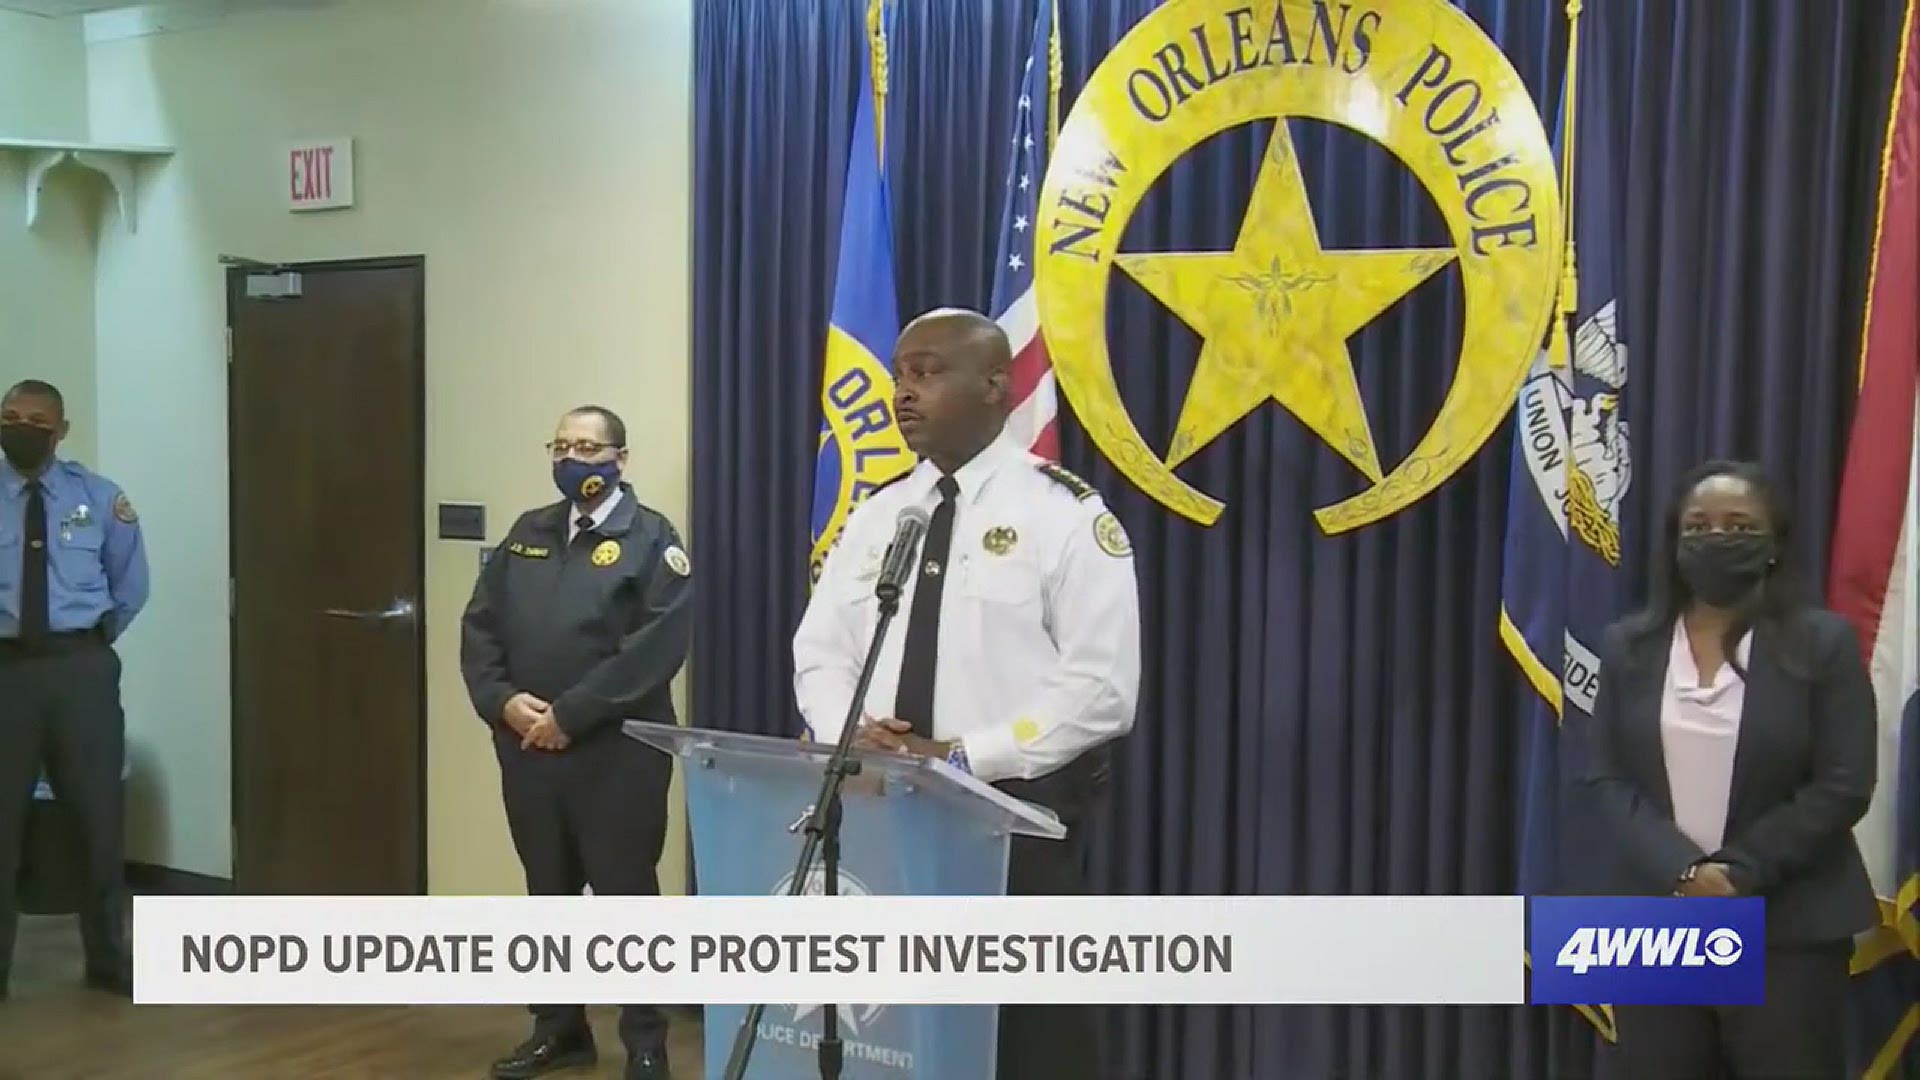 "We here at the NOPD strive to be at the forefront of modern policing and criminal justice reform," Superintendent of Police Shaun Ferguson said.